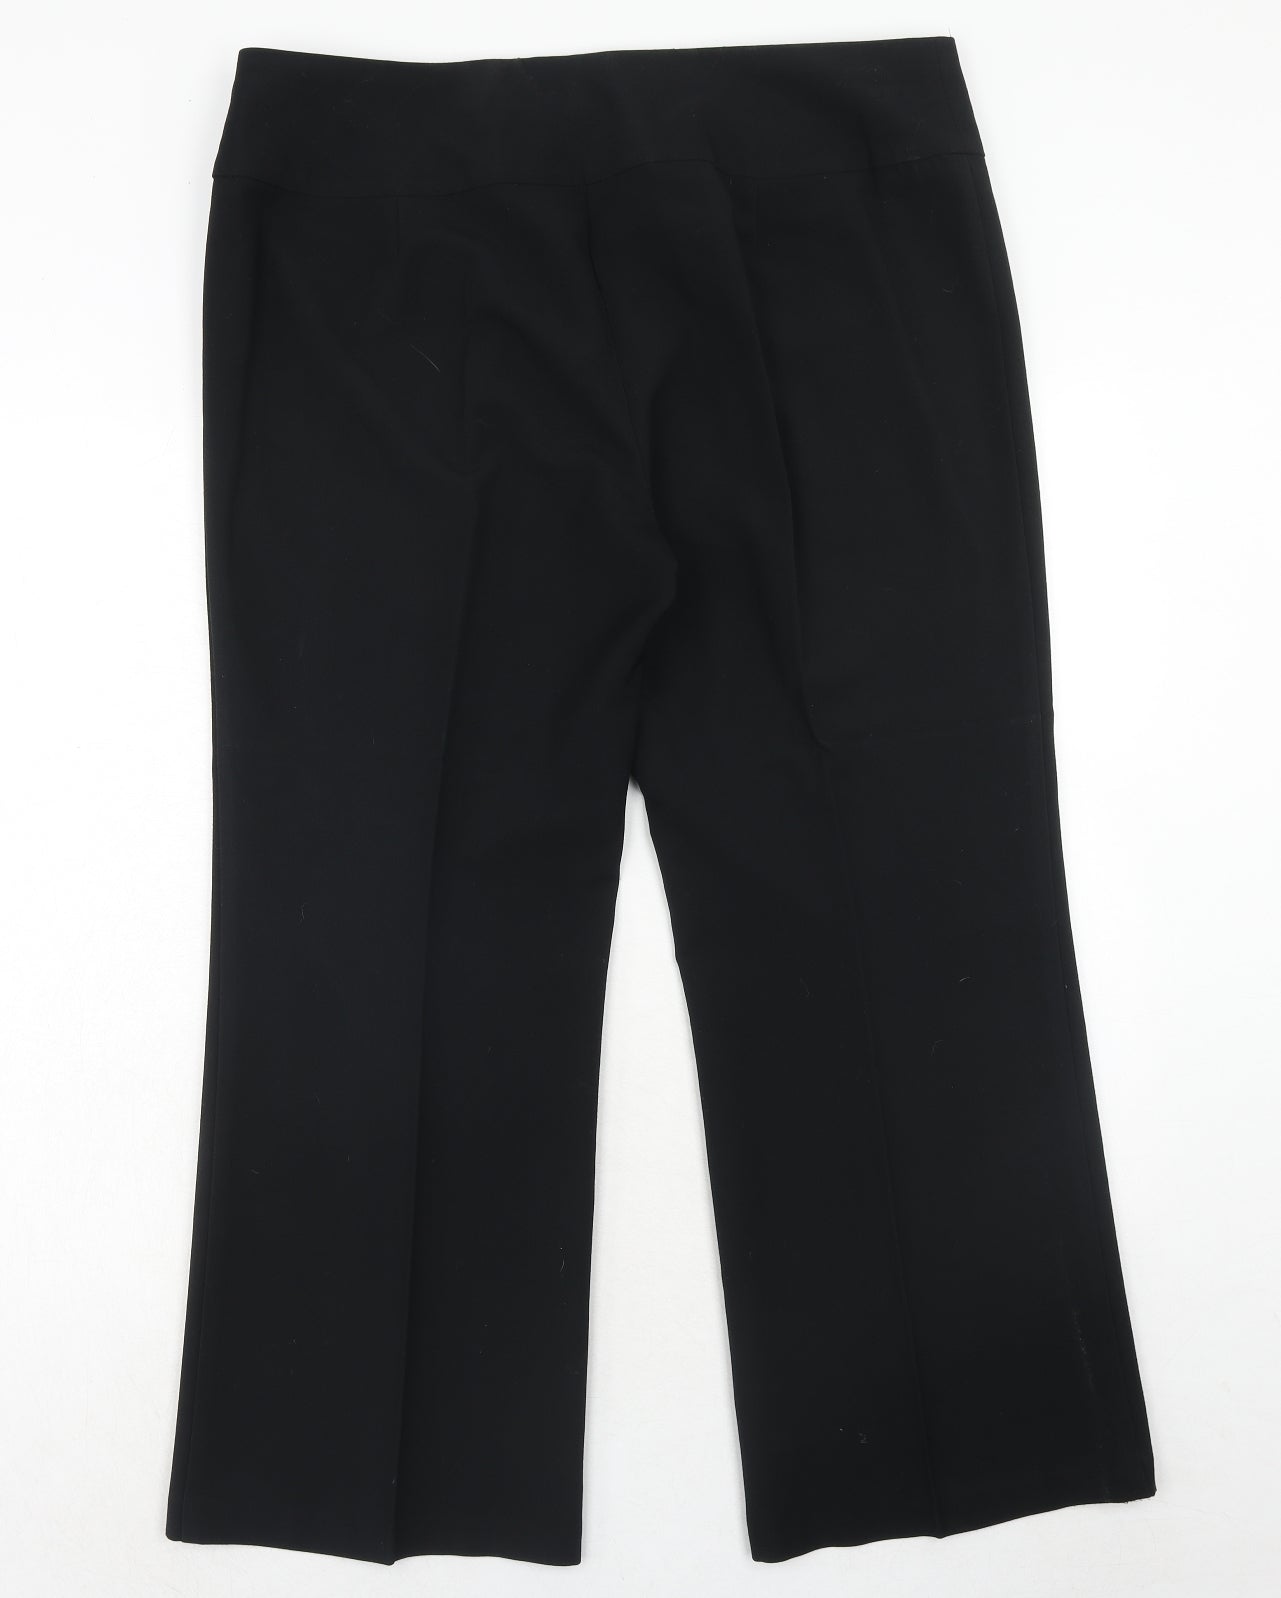 BHS Womens Black Polyester Trousers Size 18 Regular Zip